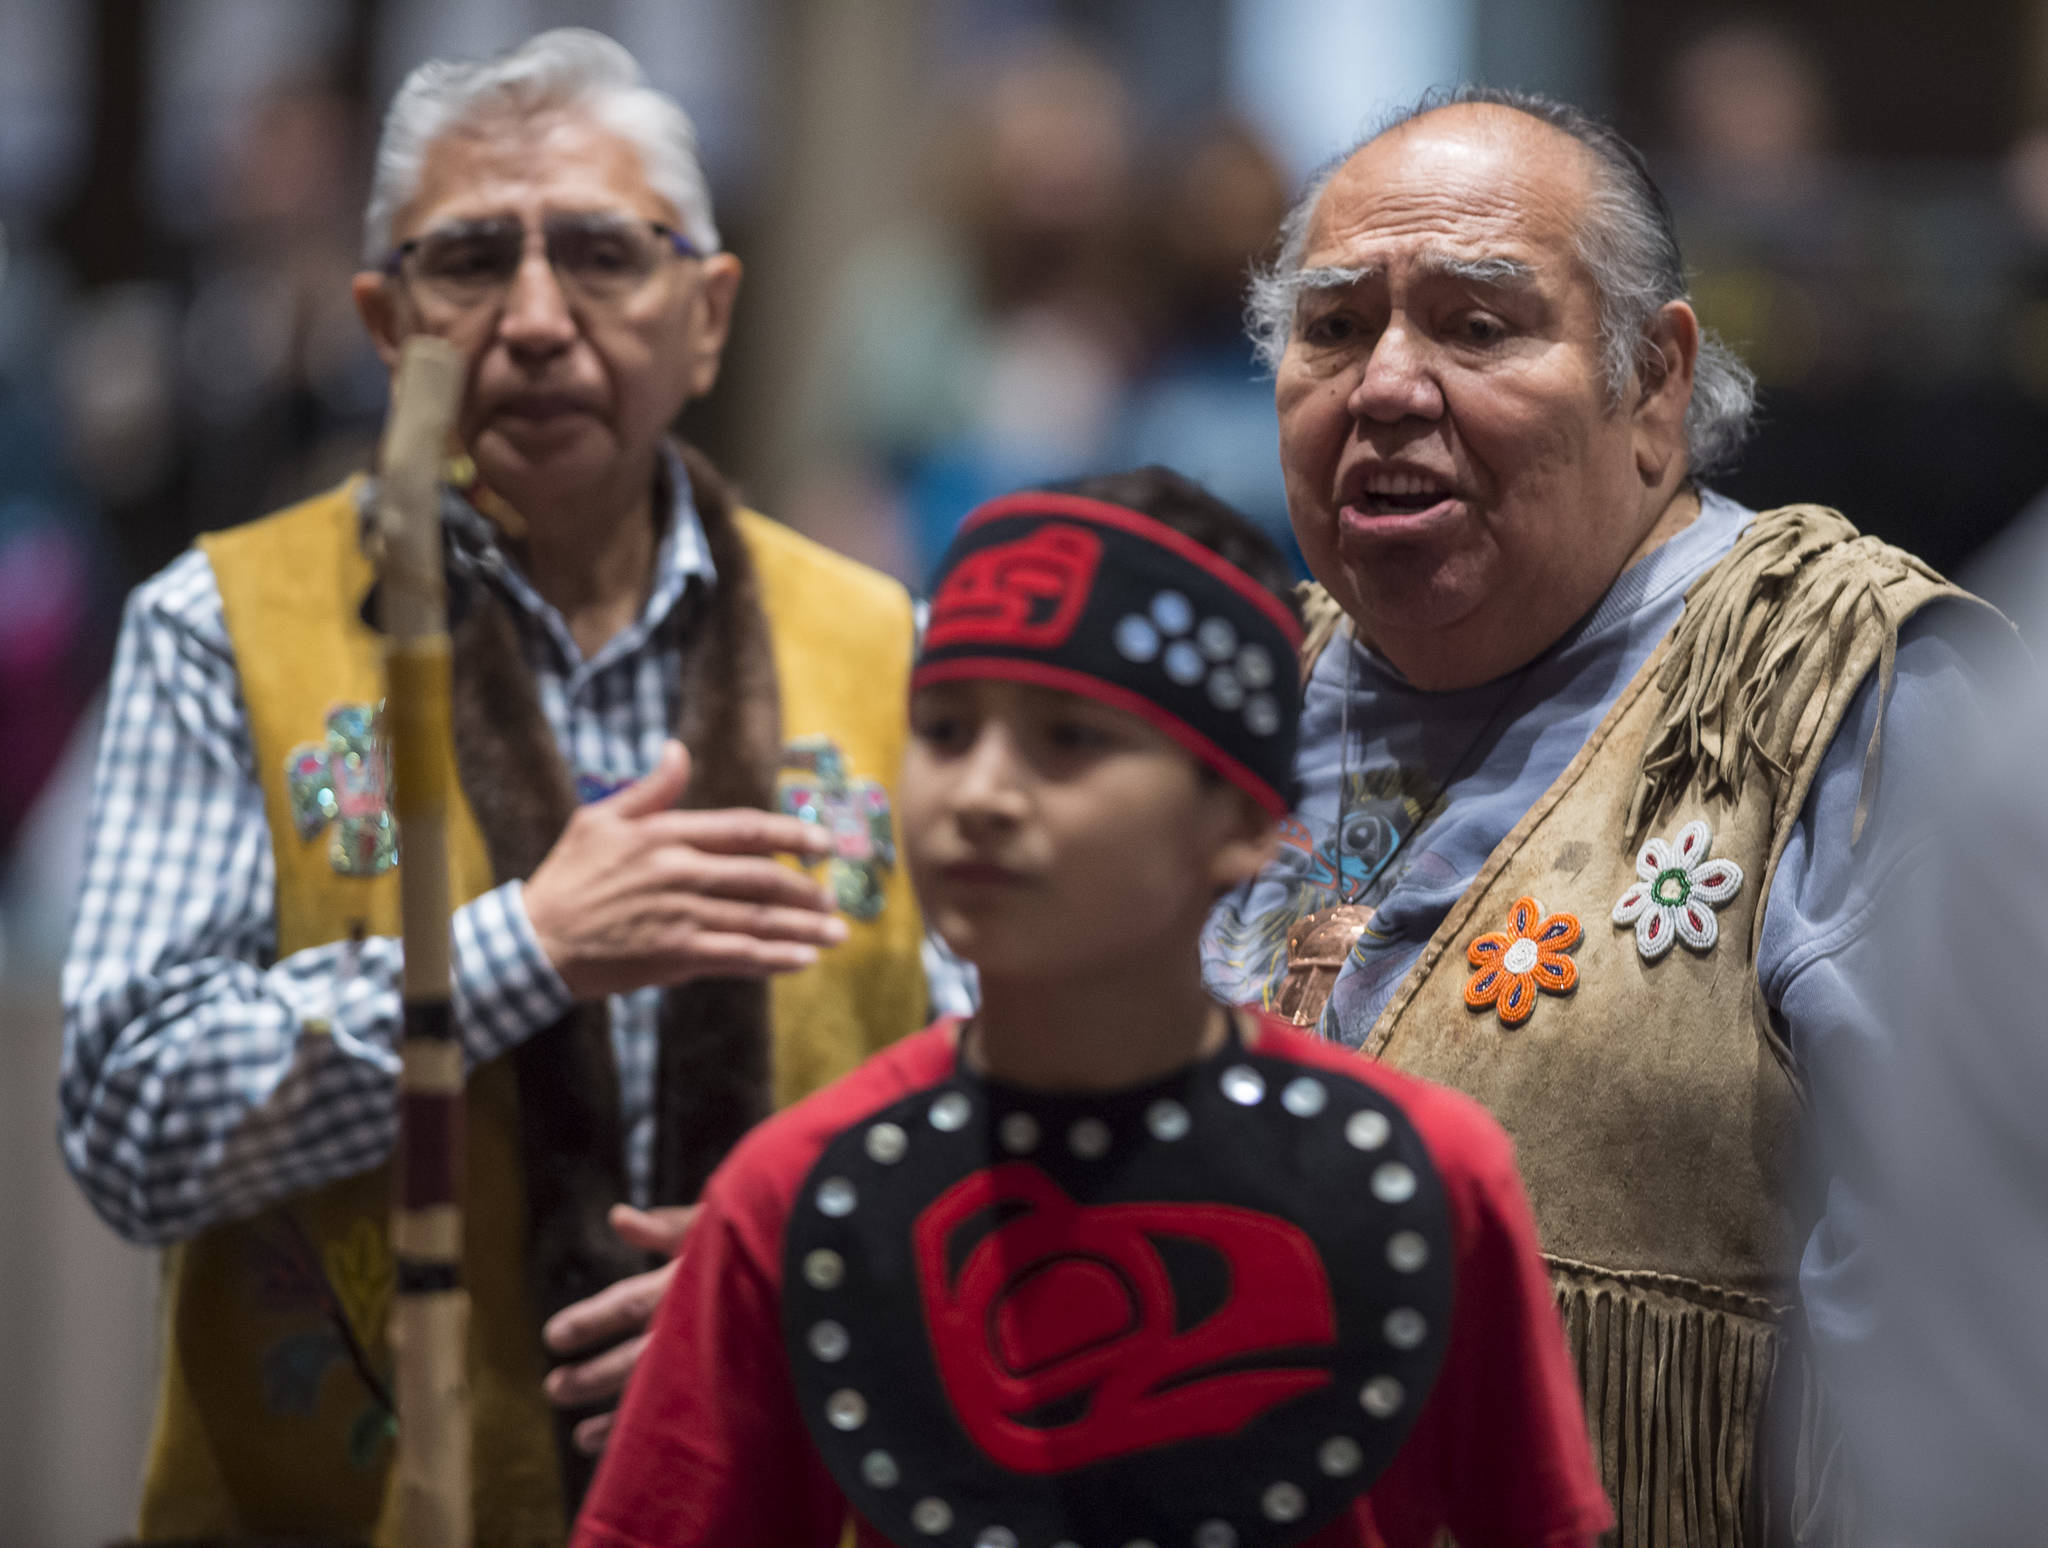 Tlingit elders David Katzeek, right, and Paul Marks, left, watch as Tyler Frisby, a member of the Tlingit Culture Language and Literacy Dance Group from Harborview Elementary School dance exits during the Voices of Our Ancestors Language Summit at Centennial Hall on Tuesday, Nov. 13, 2018. (Michael Penn | Juneau Empire)